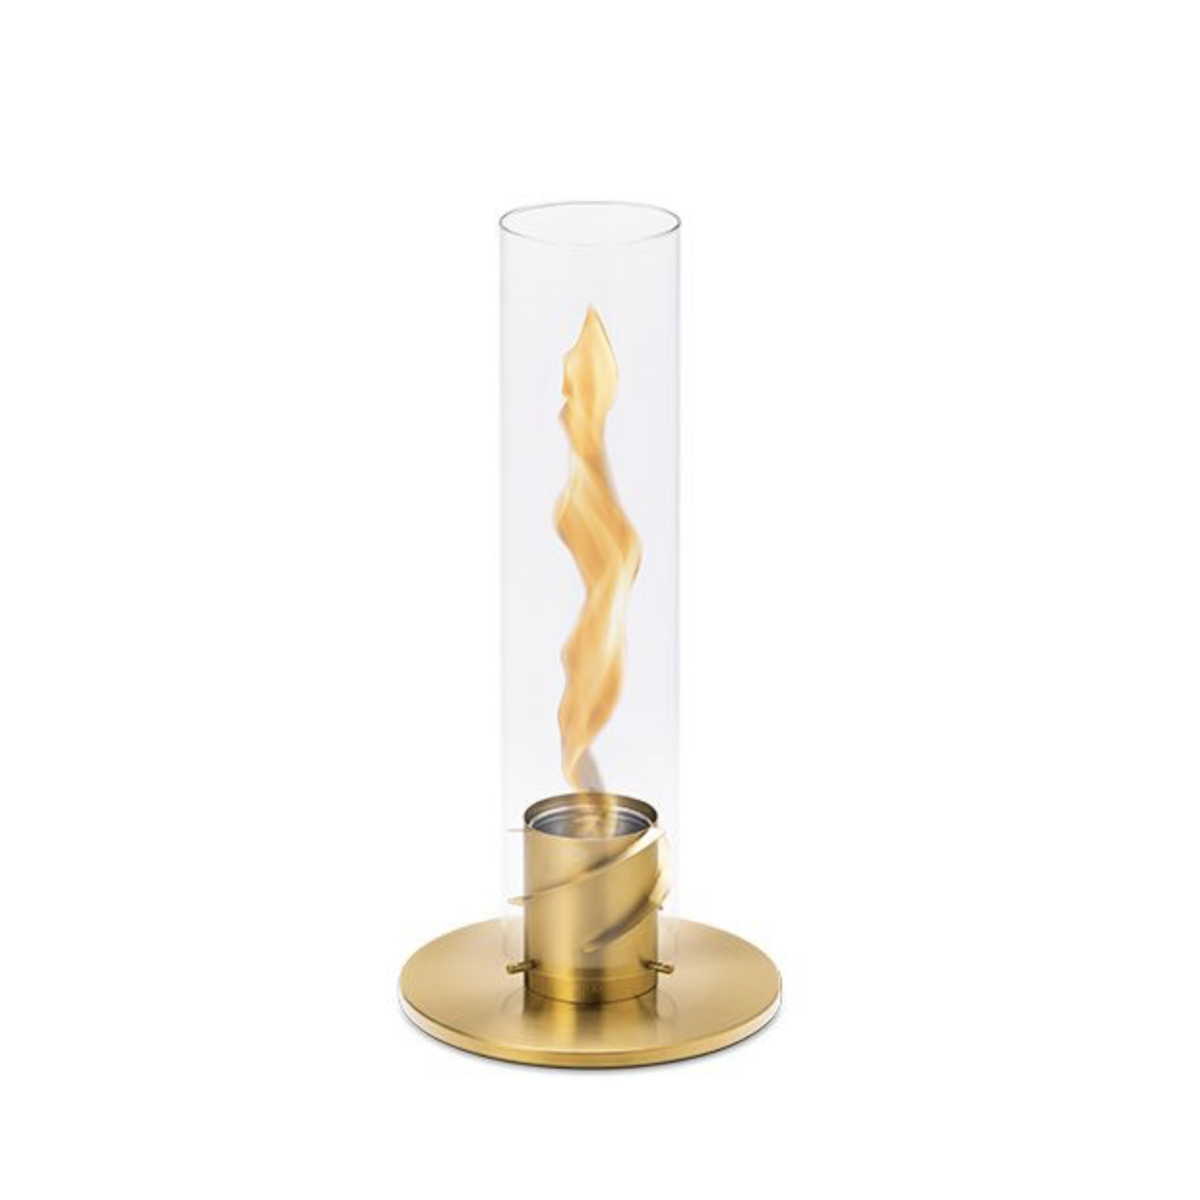 HOFATS SPIN 90 table fire - gold